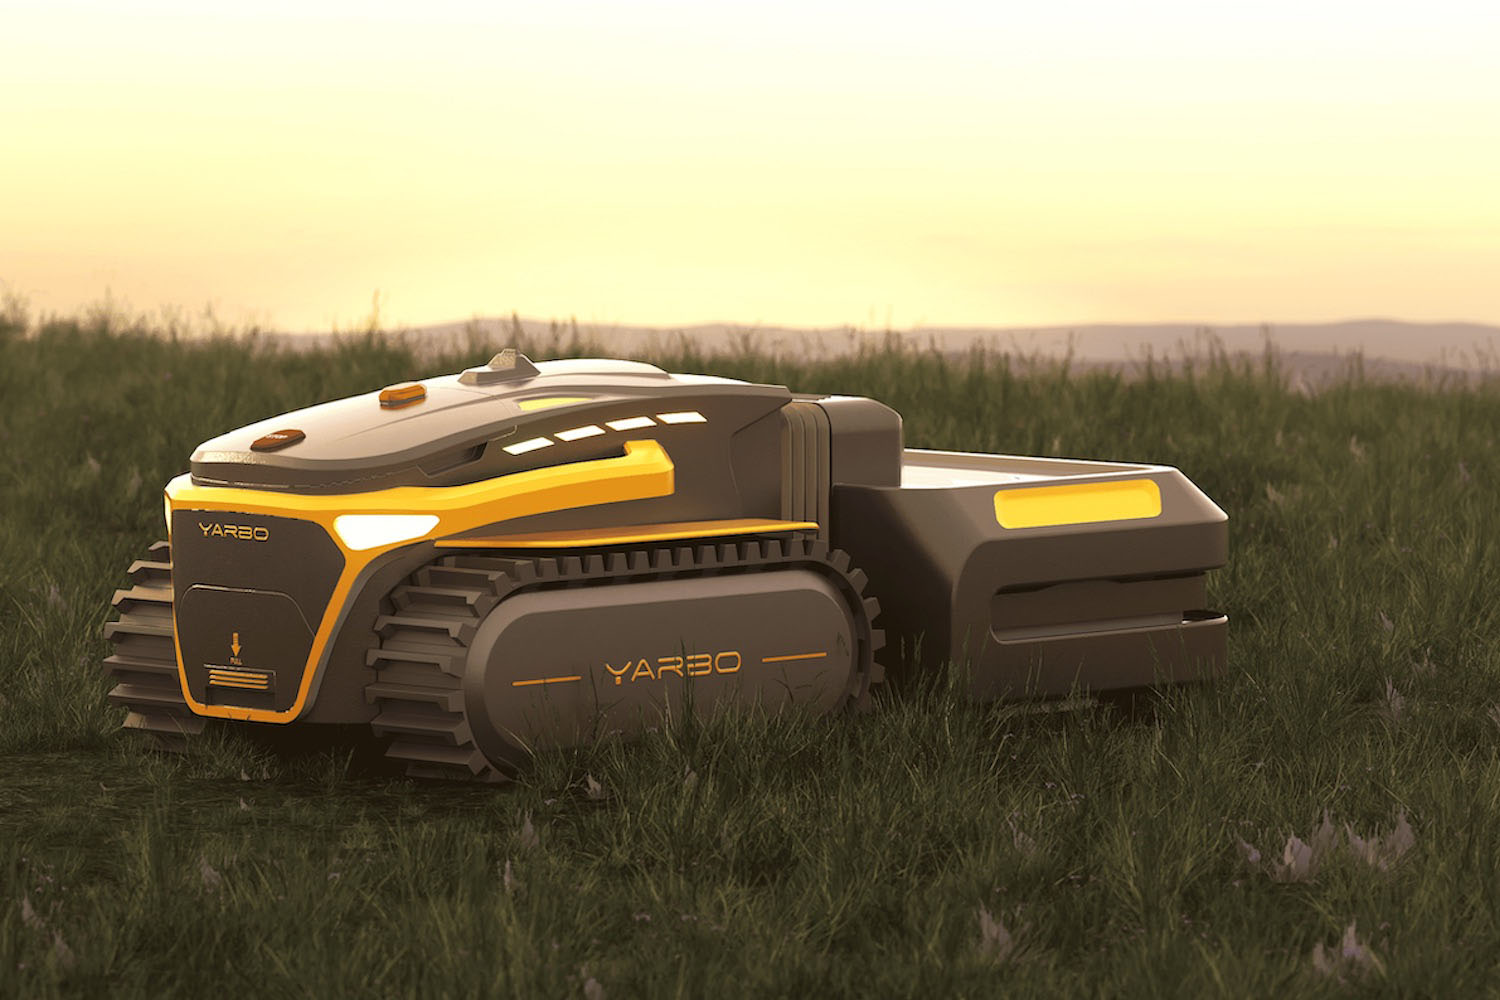 a Yarbo lawncare robot device in a field of grass